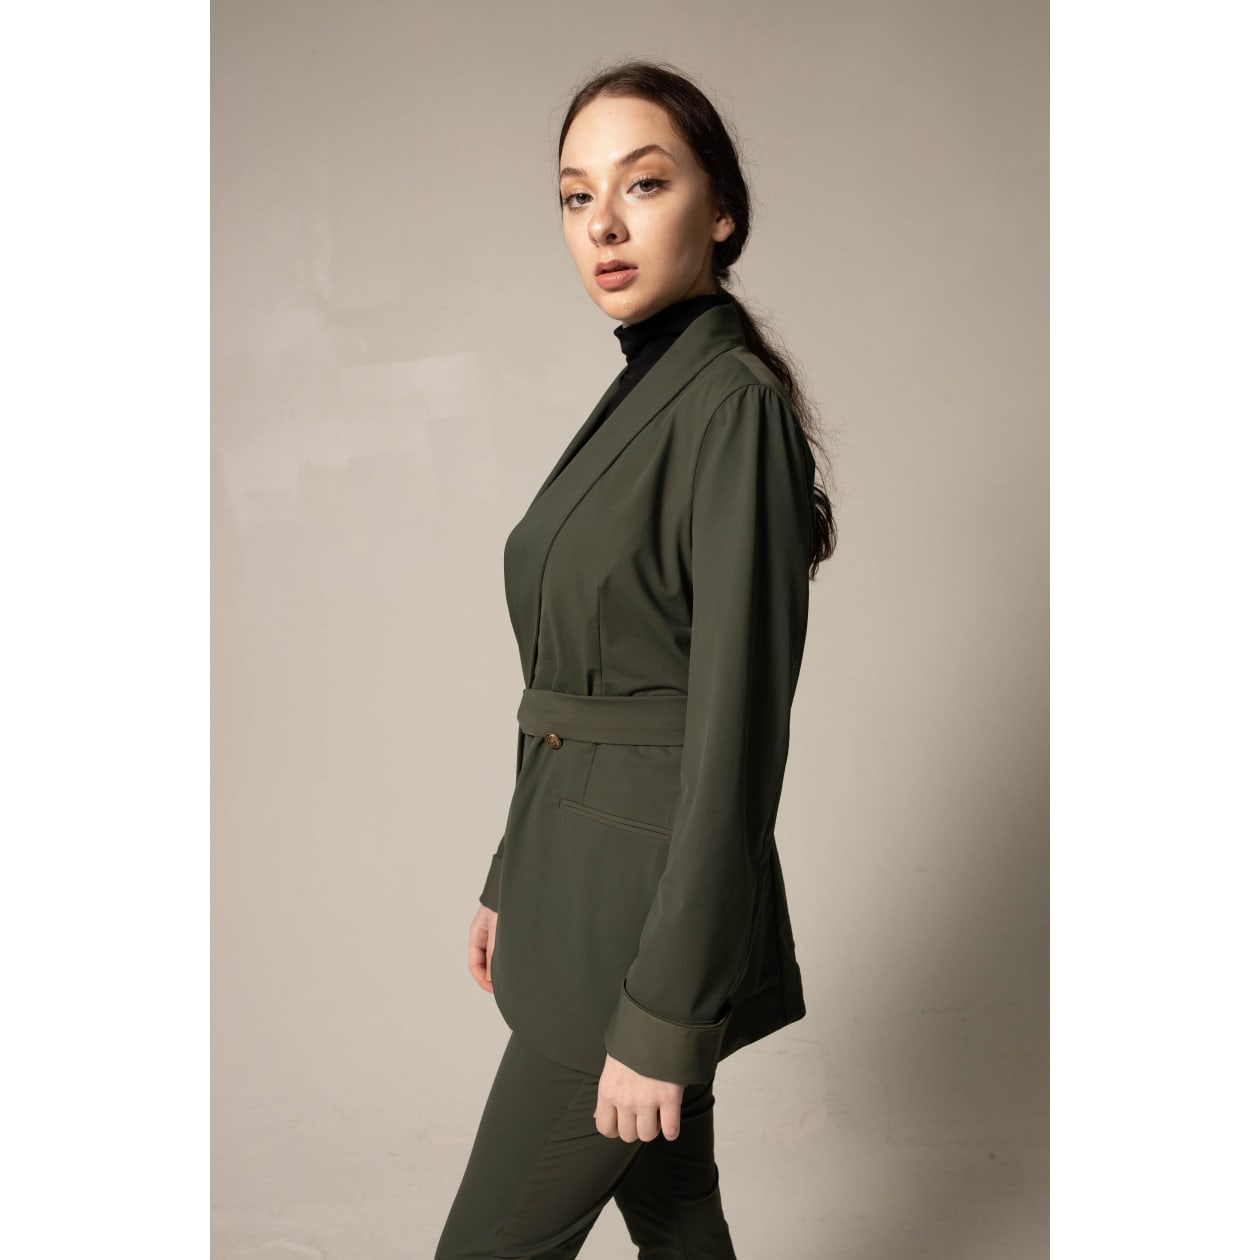 Women's Olive Blazer with Front Buttons